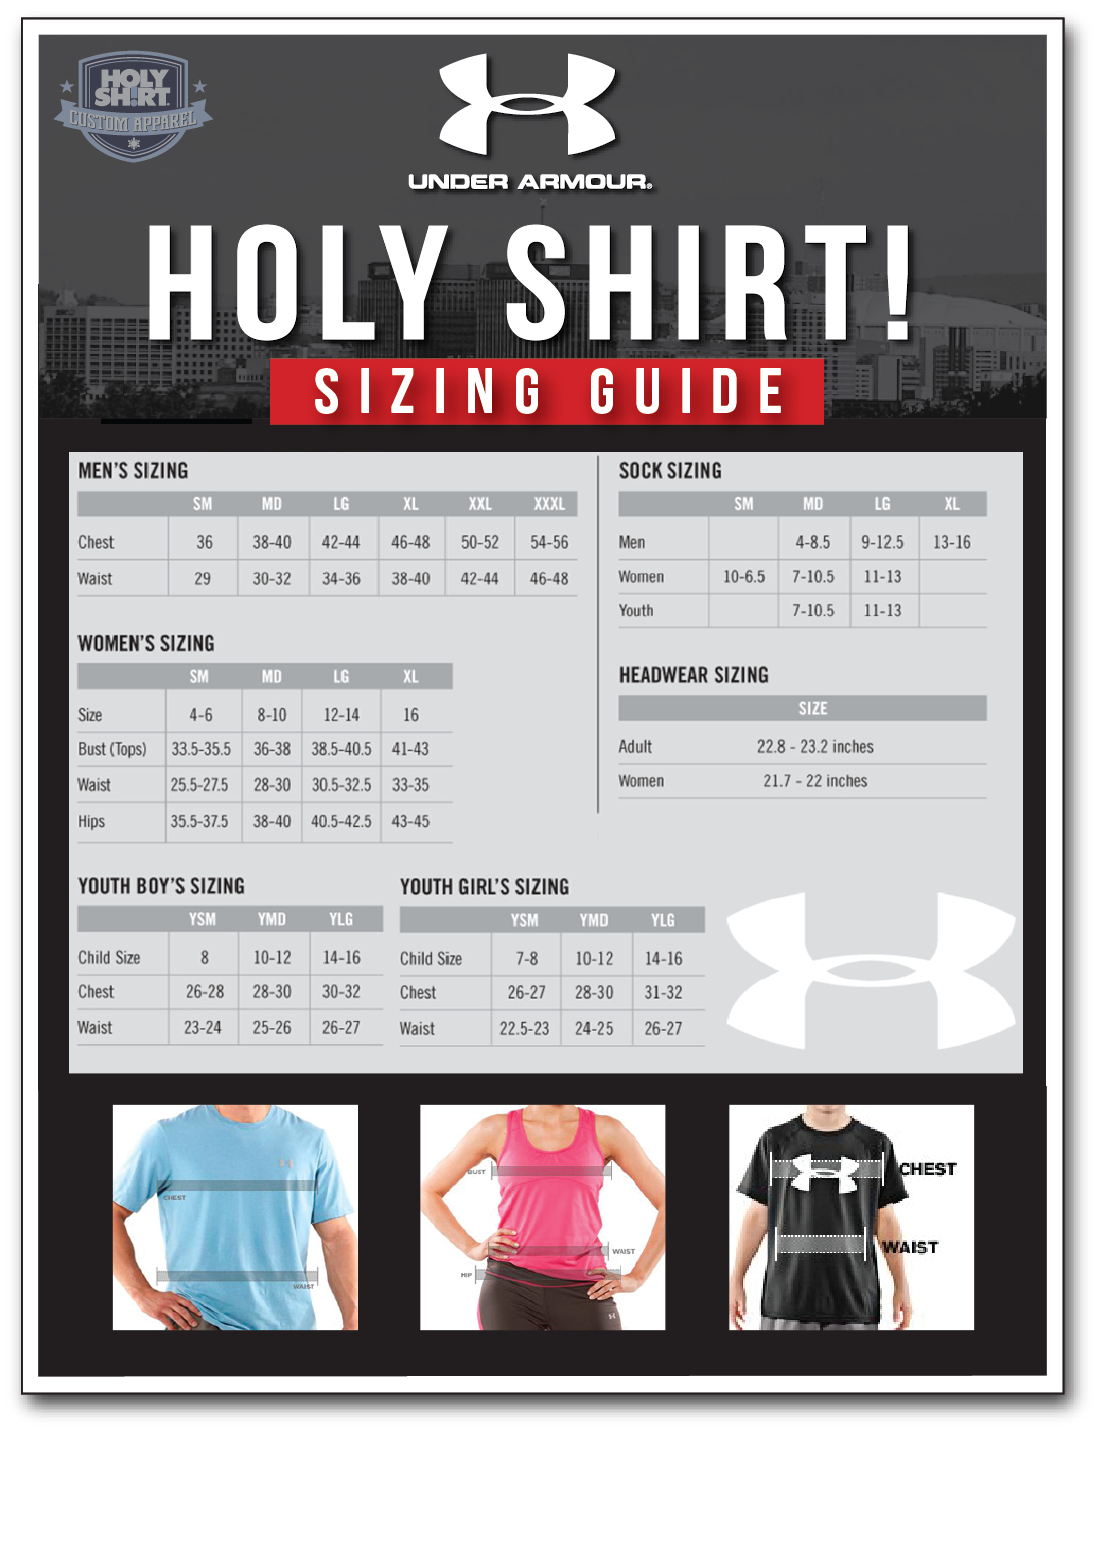 Confuso Cardenal tambor Under Armour Sizing Chart - Holy Shirt!